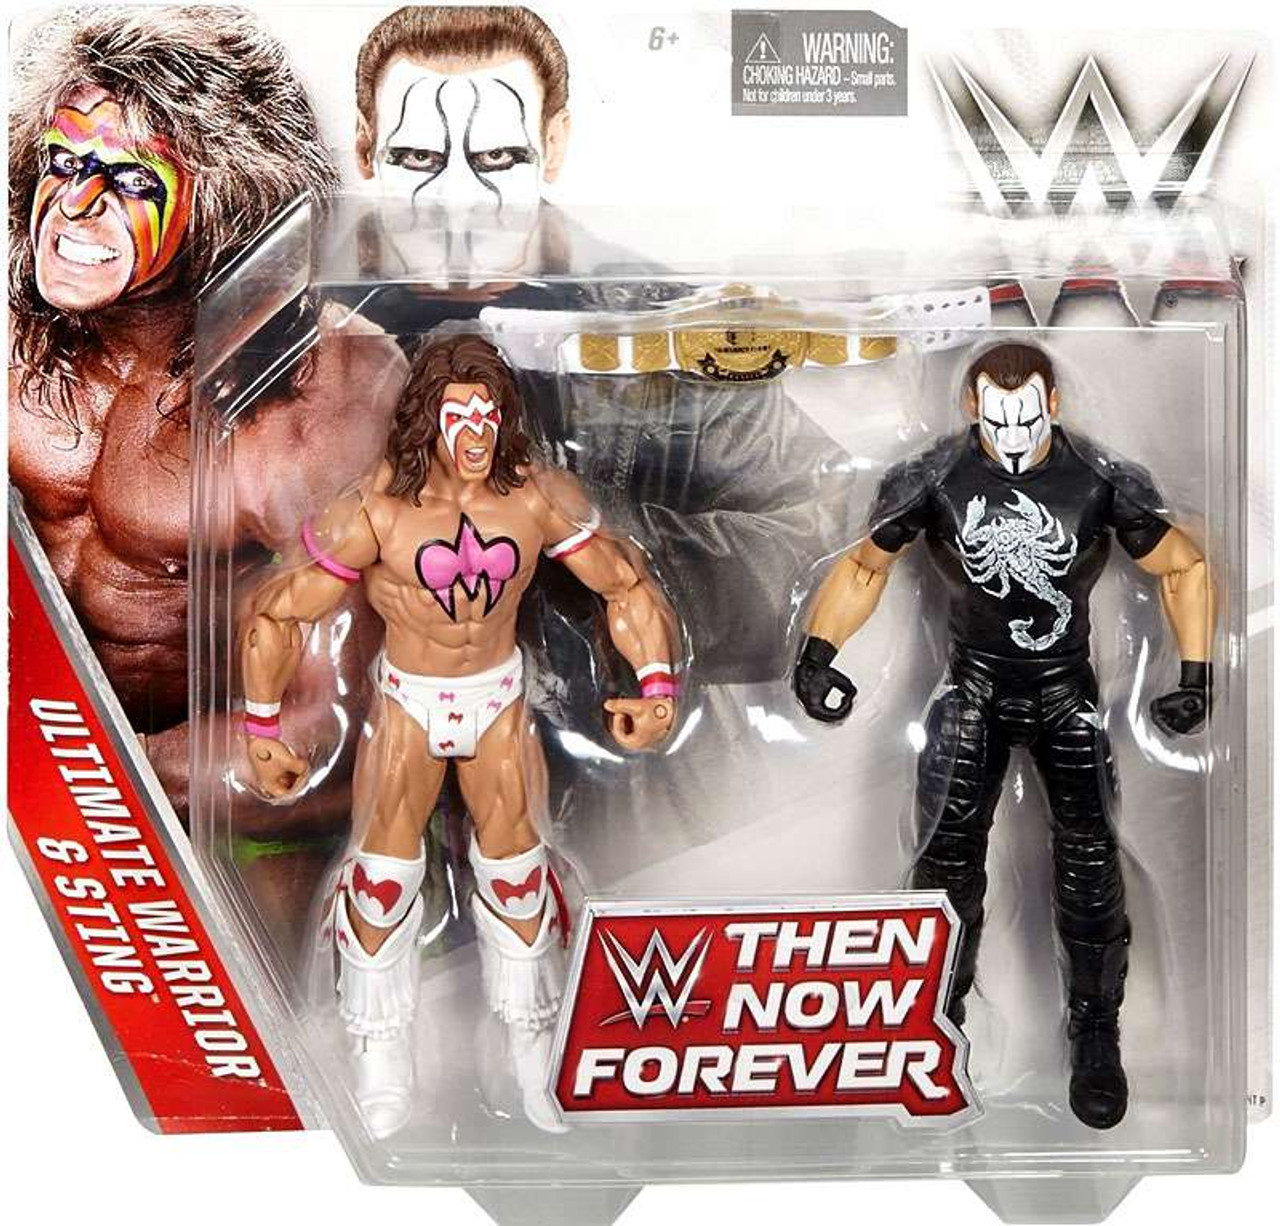 Wwe Wrestling Battle Pack Then Now Forever Ultimate Warrior Sting Exclusive Action Figure 2 Pack Mattel Toys Toywiz - dragon ball ultimate warriors roblox